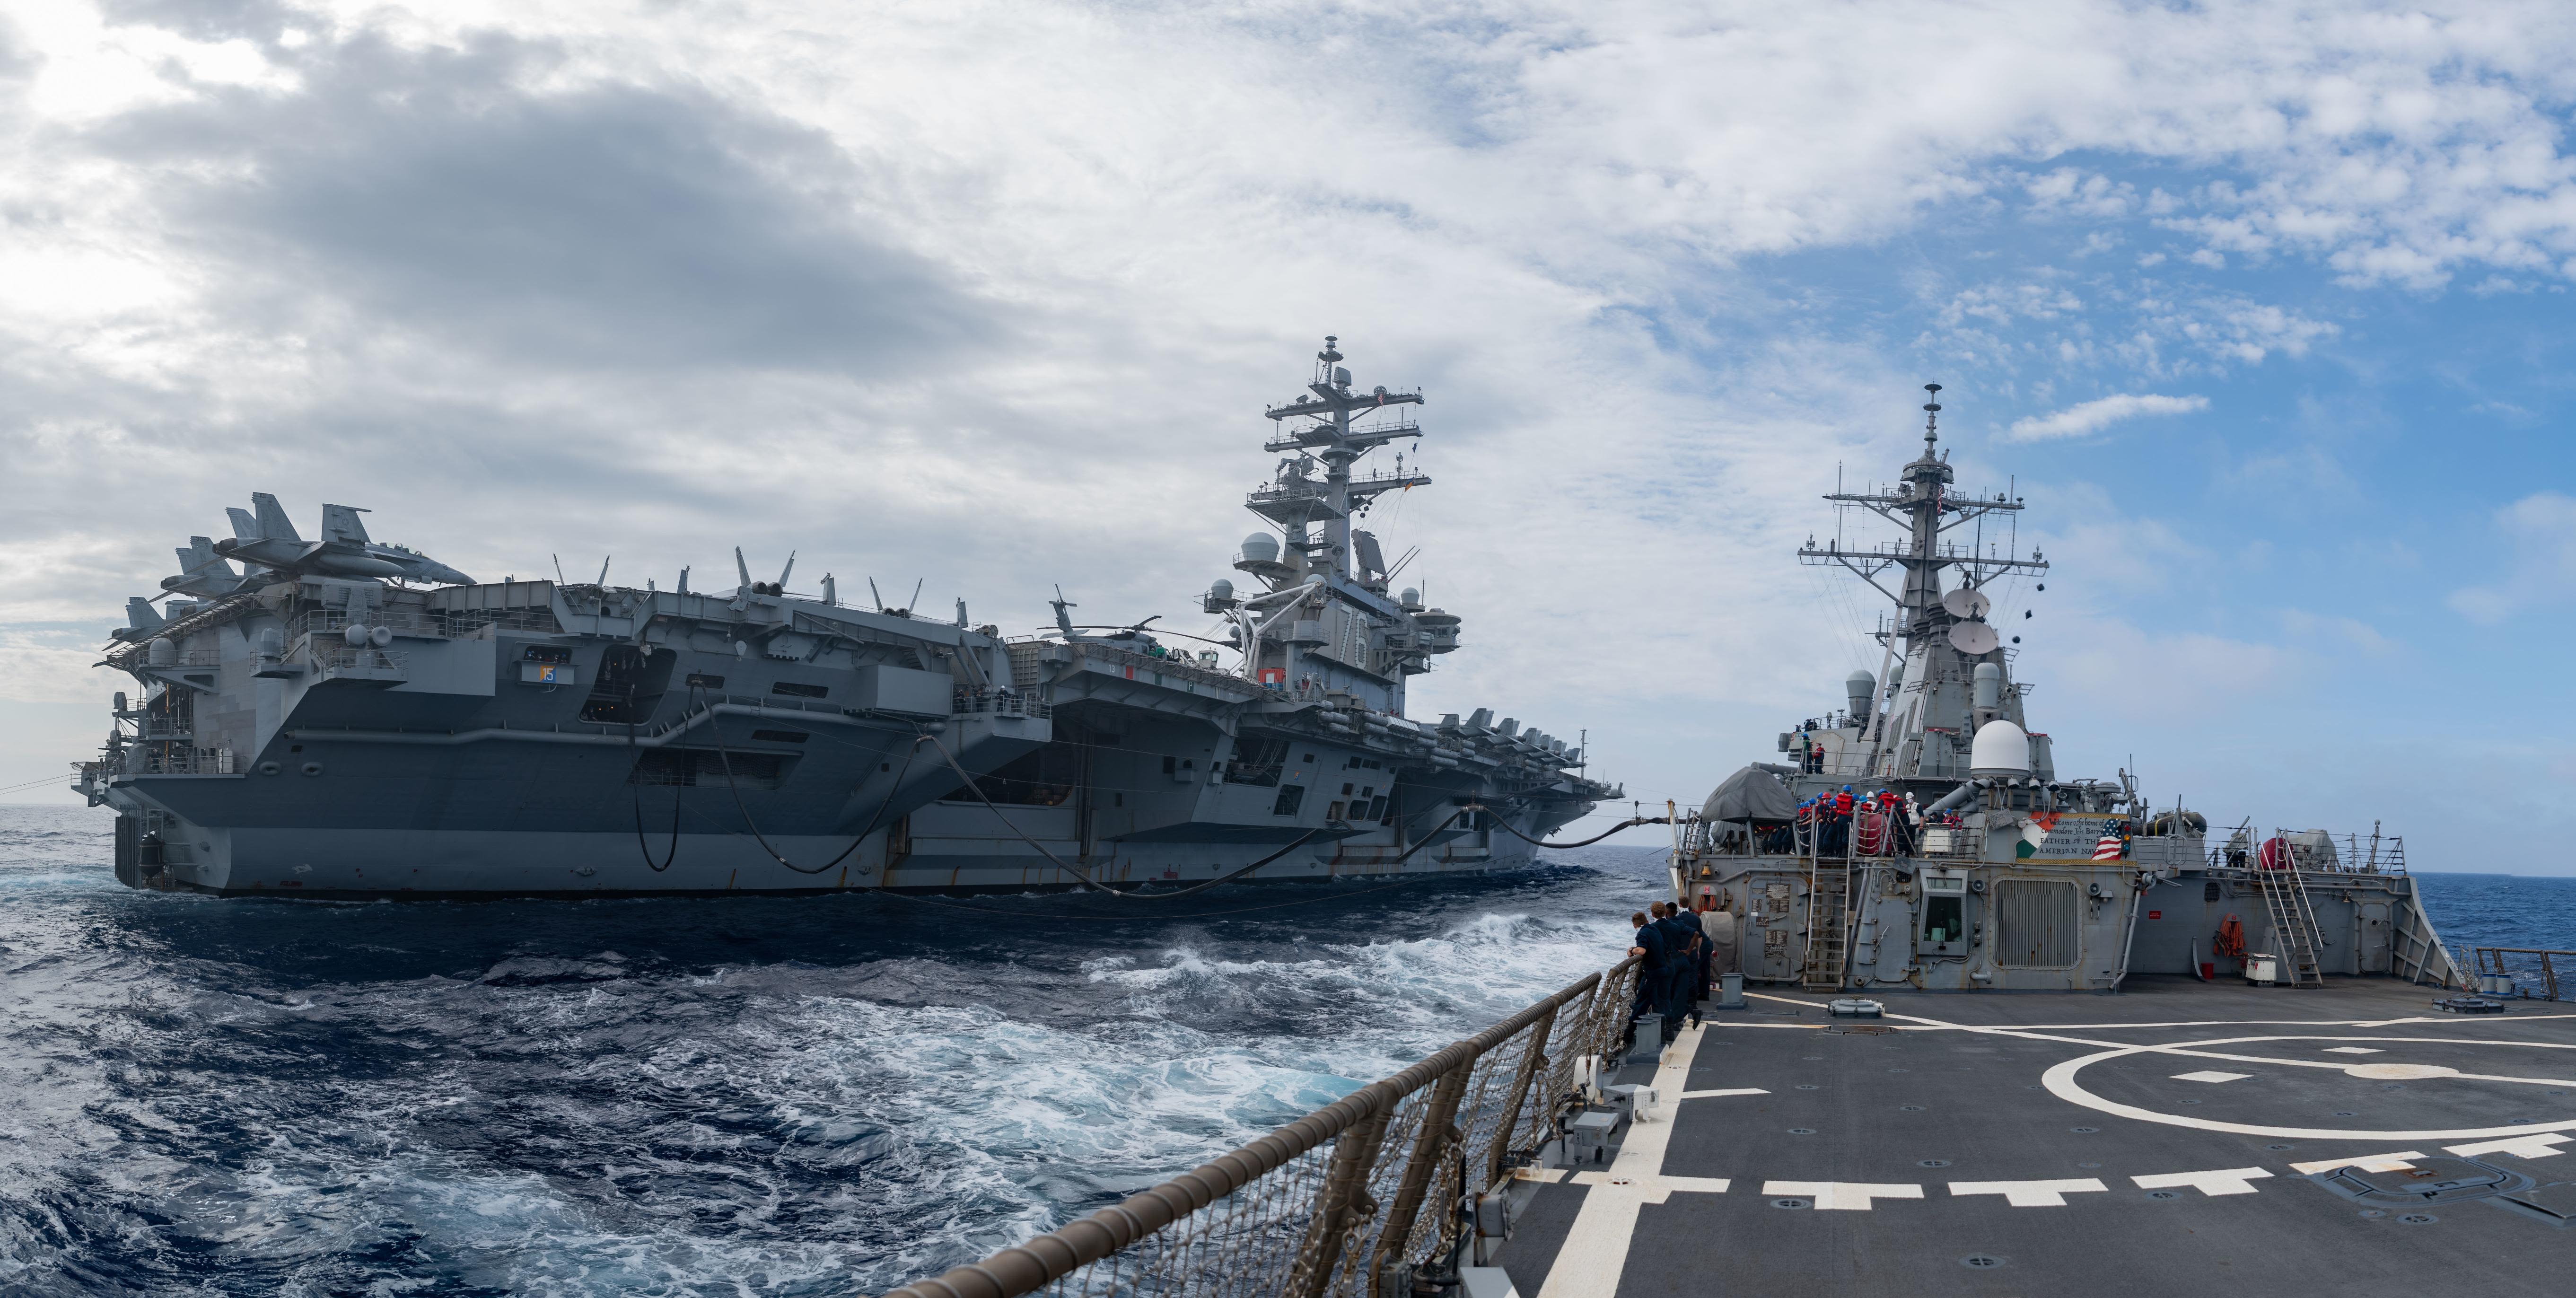 Three US Navy aircraft carriers are patrolling the Pacific Ocean